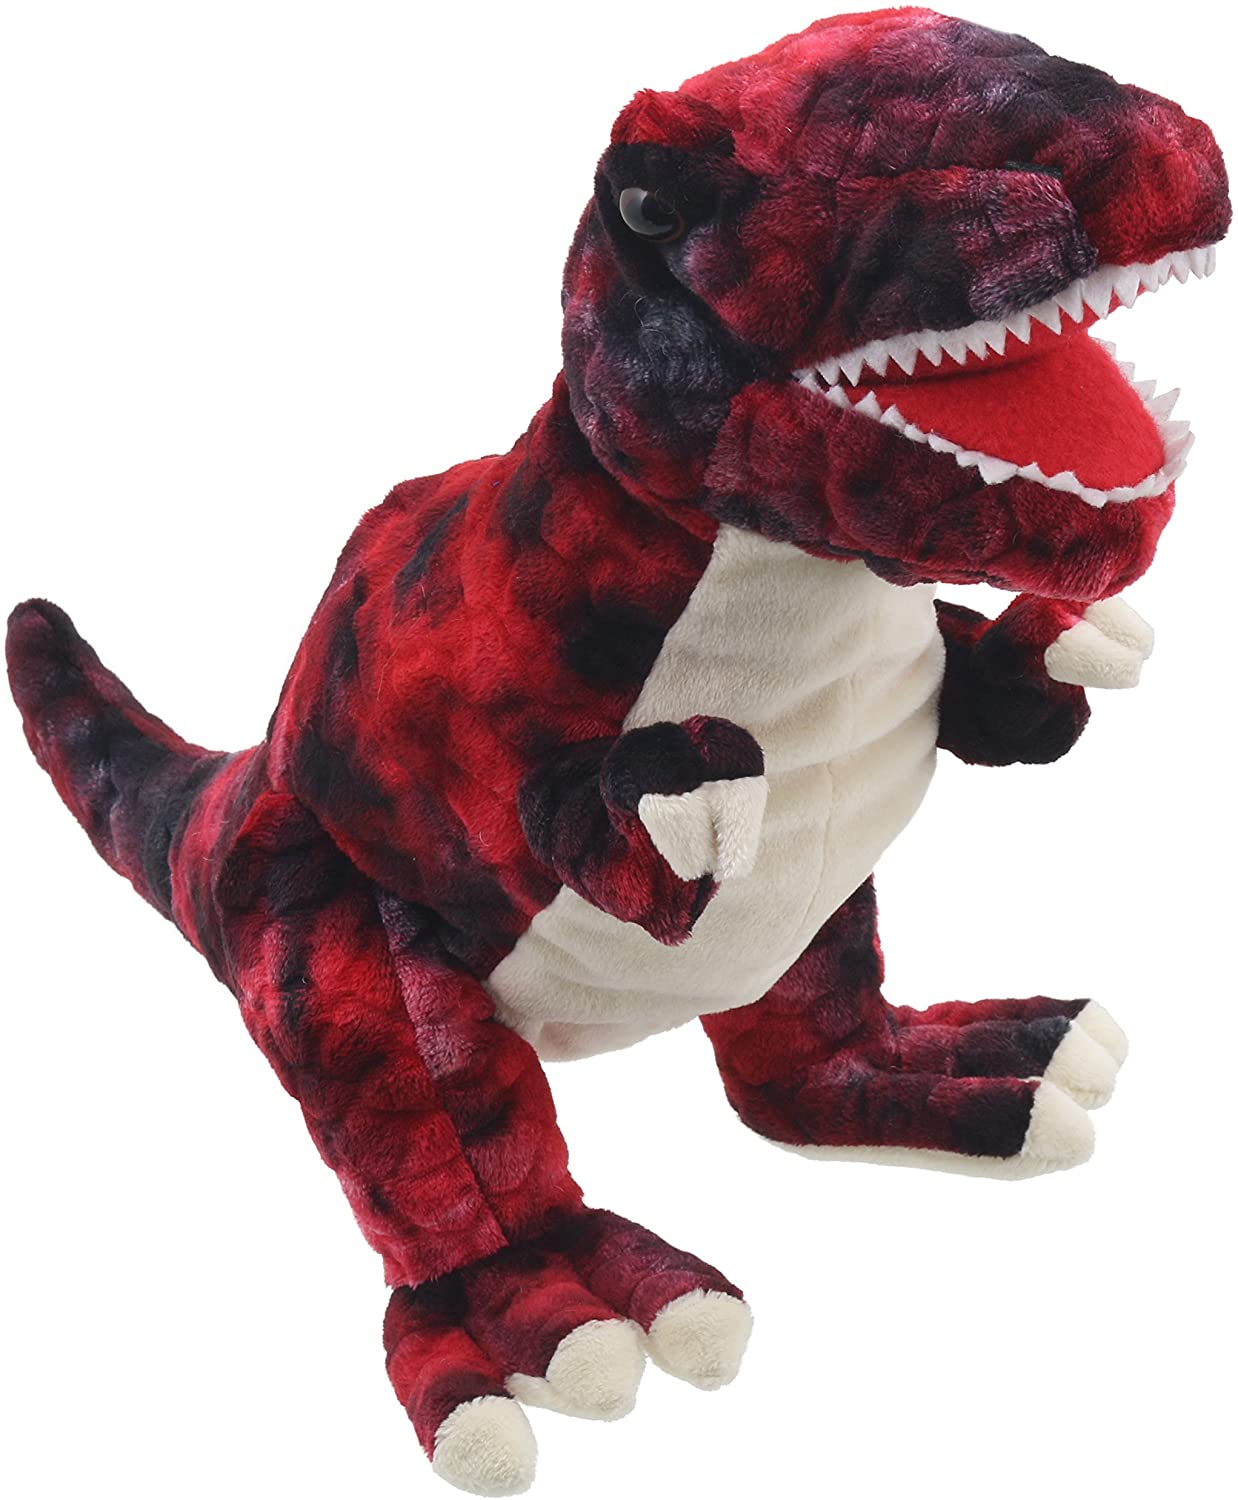 Baby Red T-Rex Puppet by The Puppet Company #PC002906